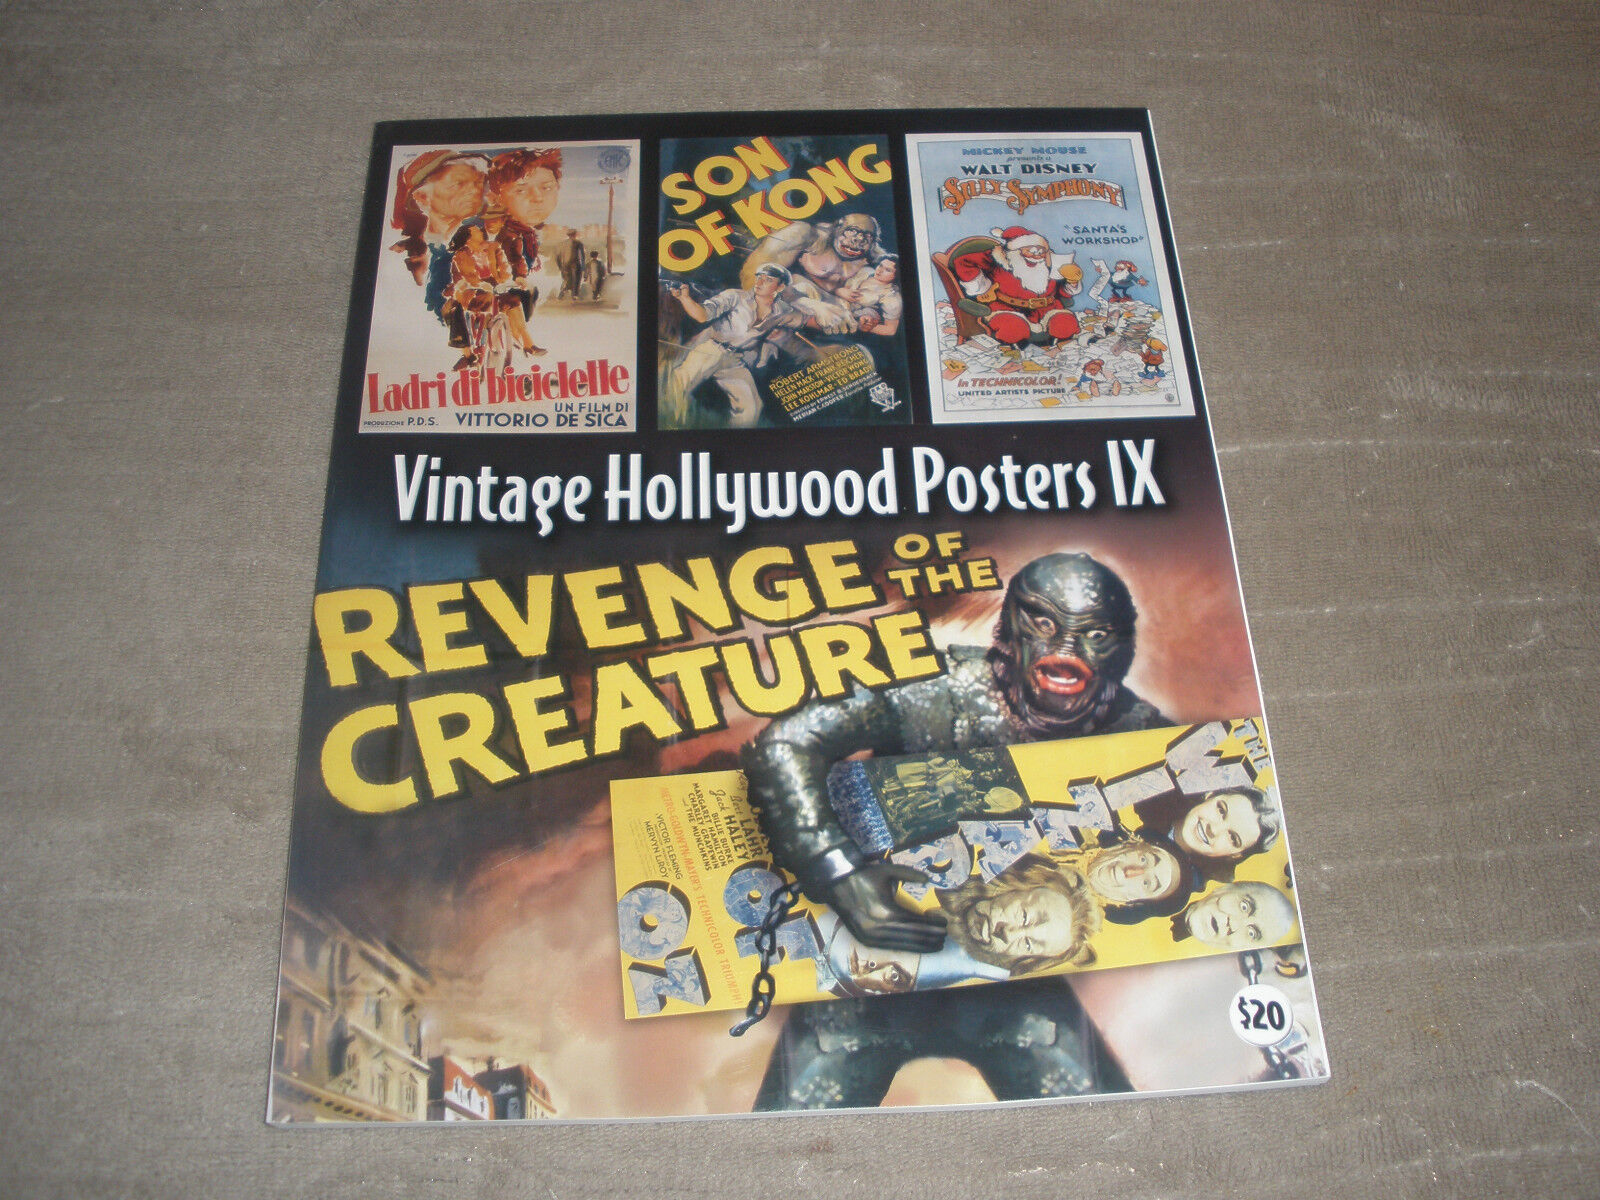 VINTAGE HOLLYWOOD MOVIE POSTER BOOK OVER 300 FULL COLOR POSTER PRINTS RARE VOL 9